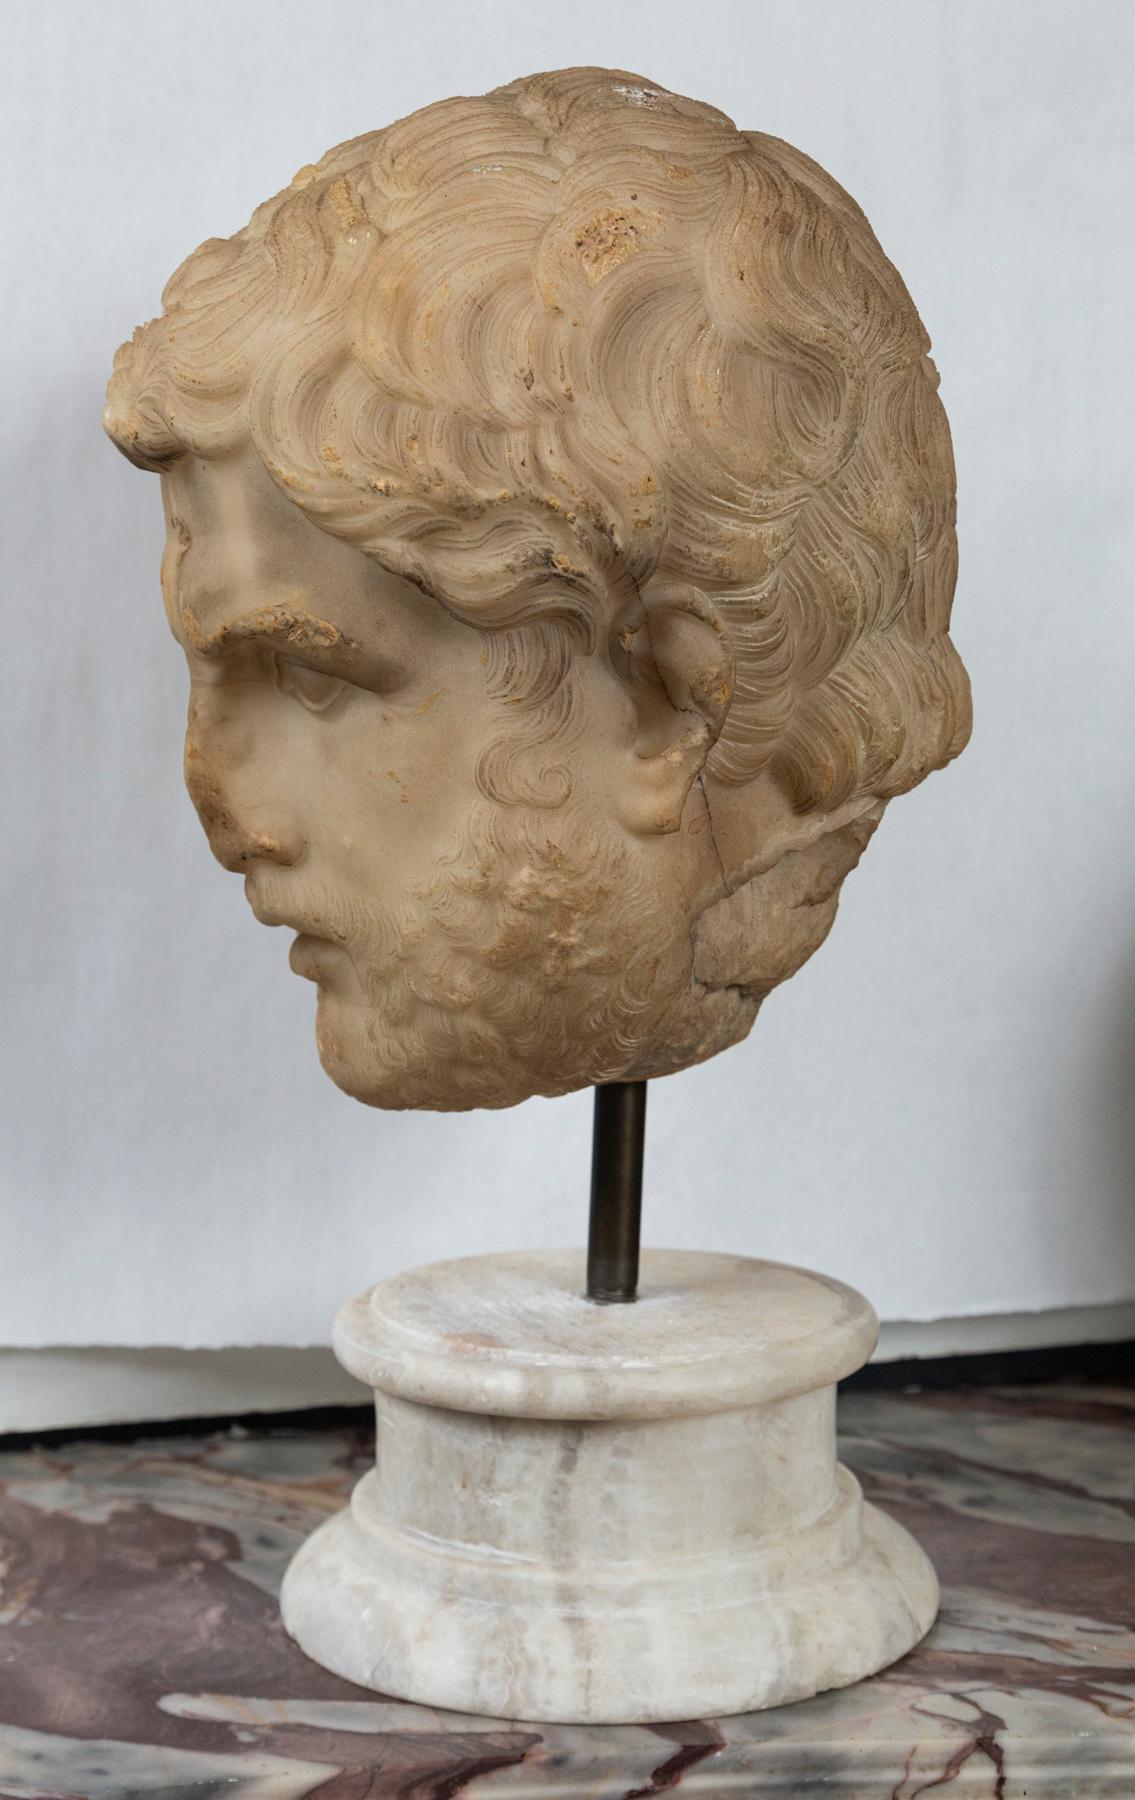 Hand-Carved Alabaster Bust of a Greek or Roman Male on a Marble  Base